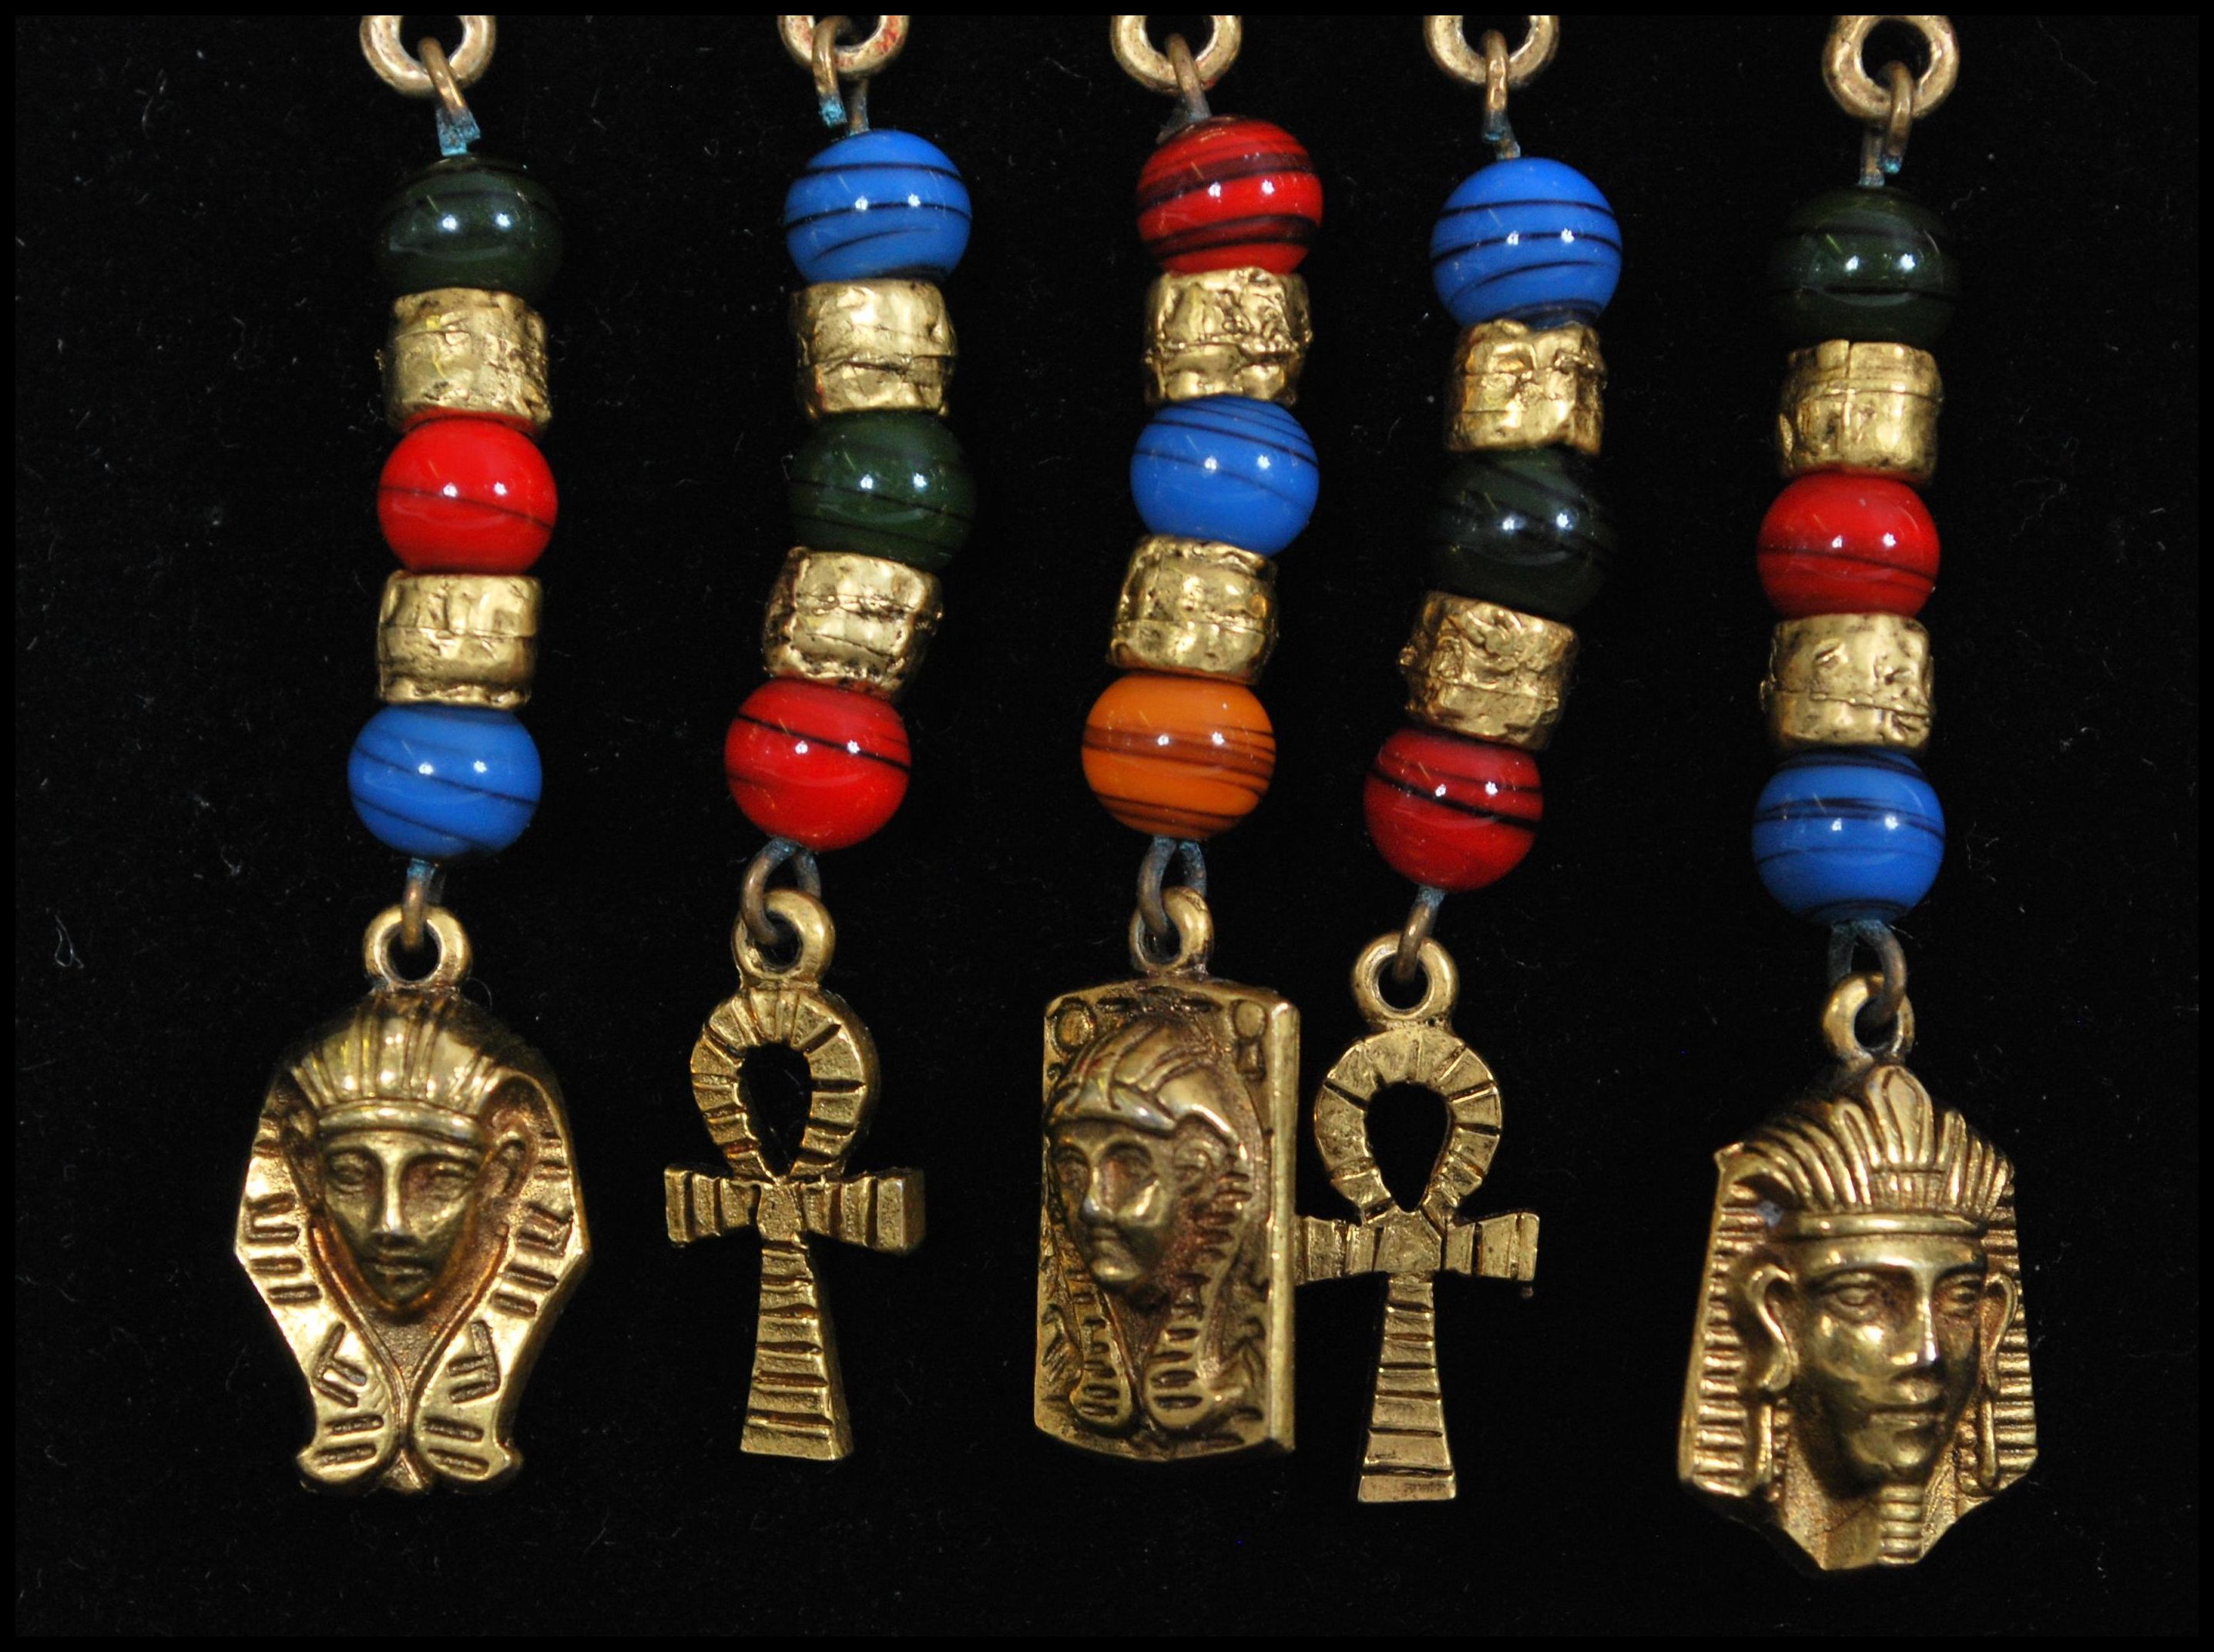 A 1960s signed Art Egyptian revival necklace and earring set by Arthur Pepper. Measures 18 inches - Image 3 of 7